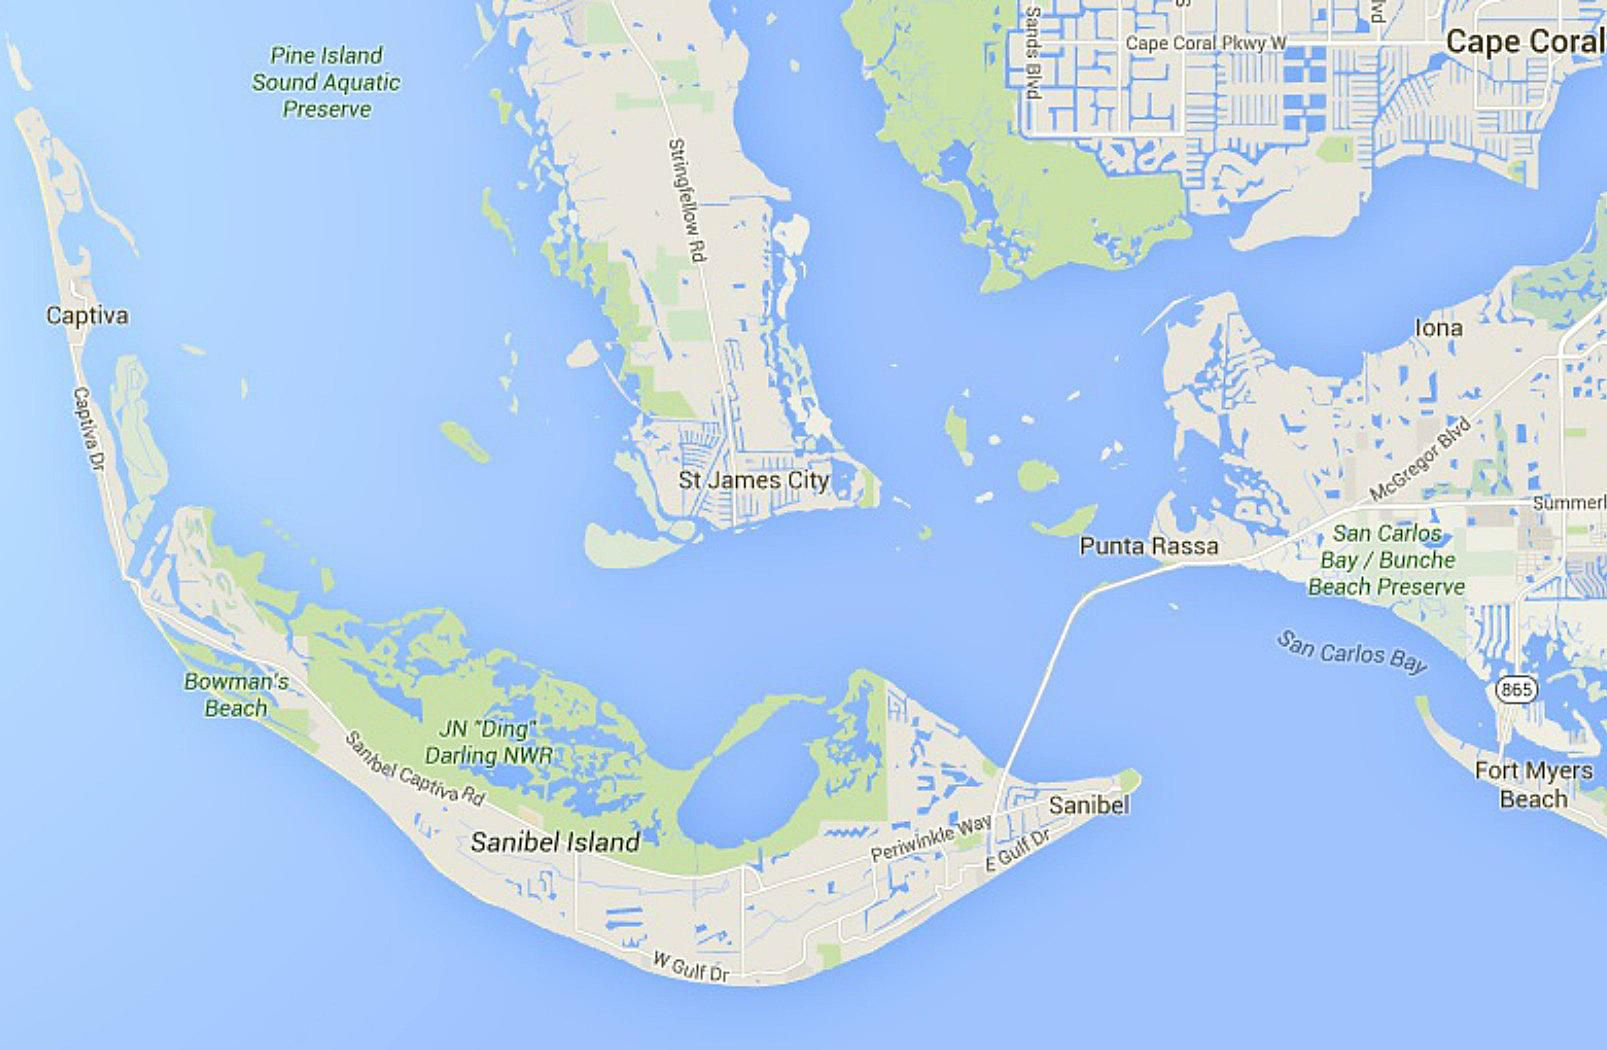 Maps Of Florida: Orlando, Tampa, Miami, Keys, And More - Where Is Sanibel Island In Florida Map